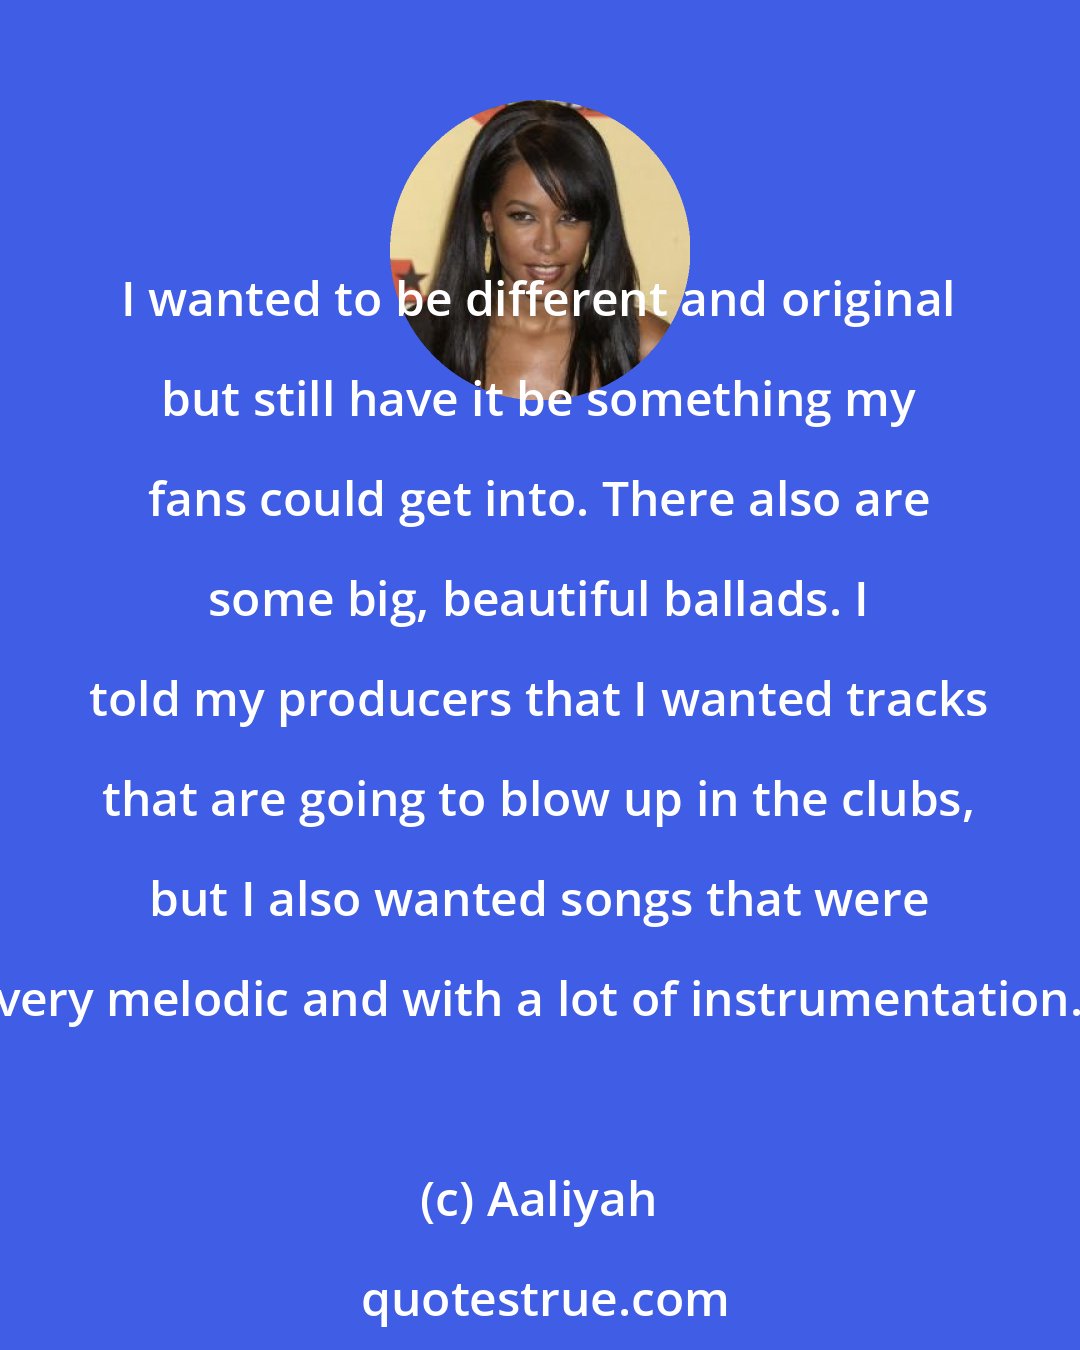 Aaliyah: I wanted to be different and original but still have it be something my fans could get into. There also are some big, beautiful ballads. I told my producers that I wanted tracks that are going to blow up in the clubs, but I also wanted songs that were very melodic and with a lot of instrumentation.